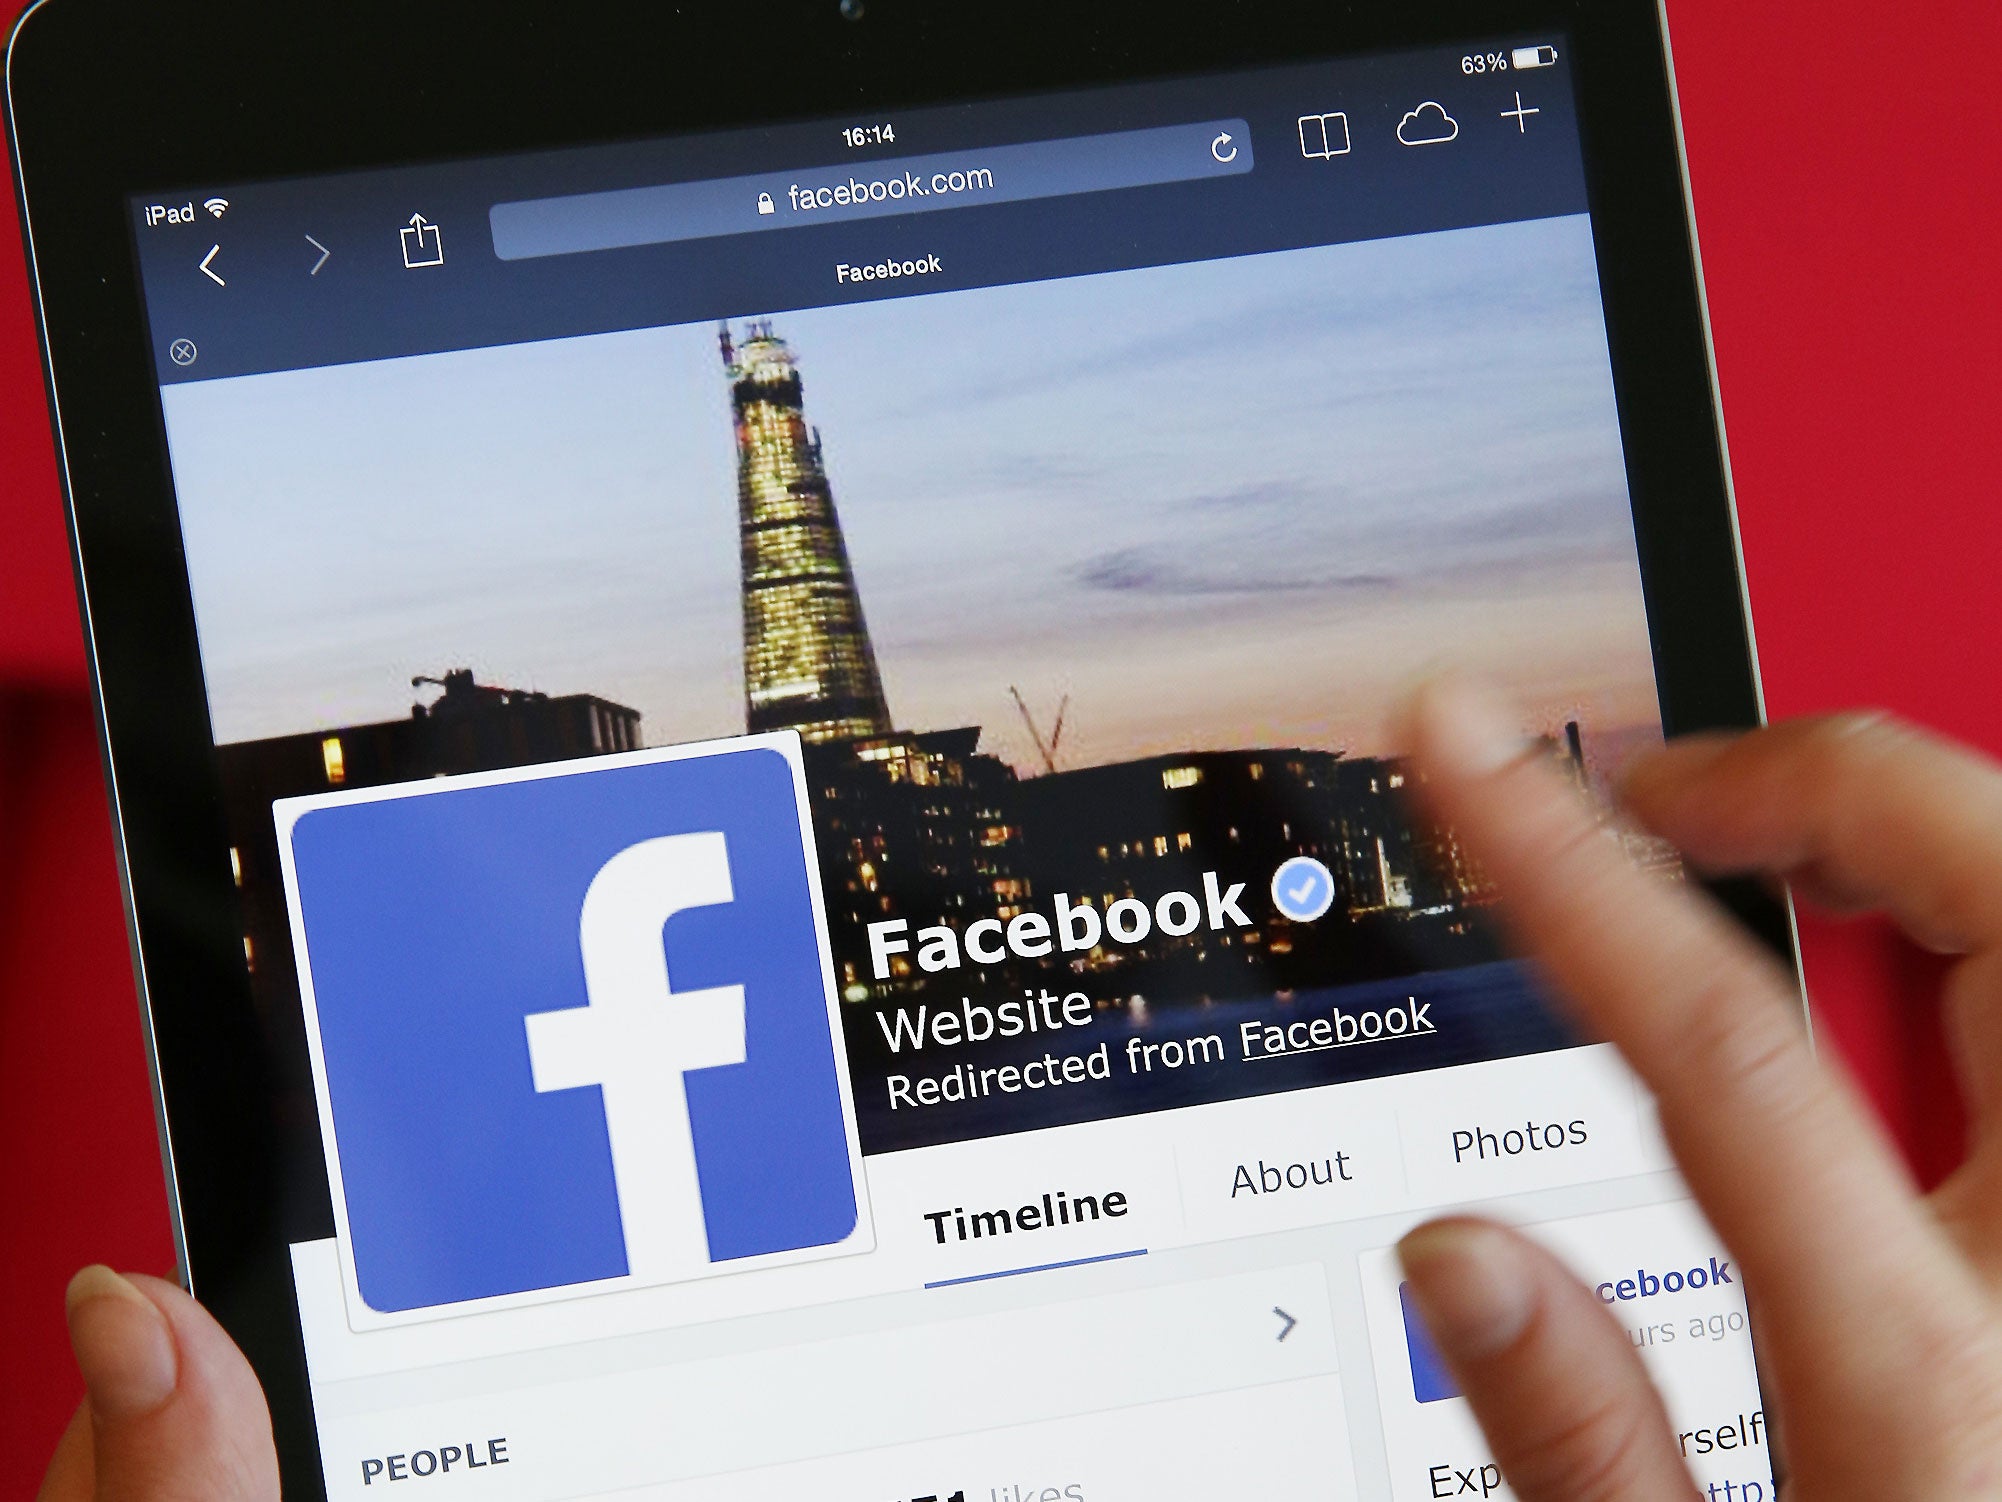 Facebook may be introducing a new browser soon